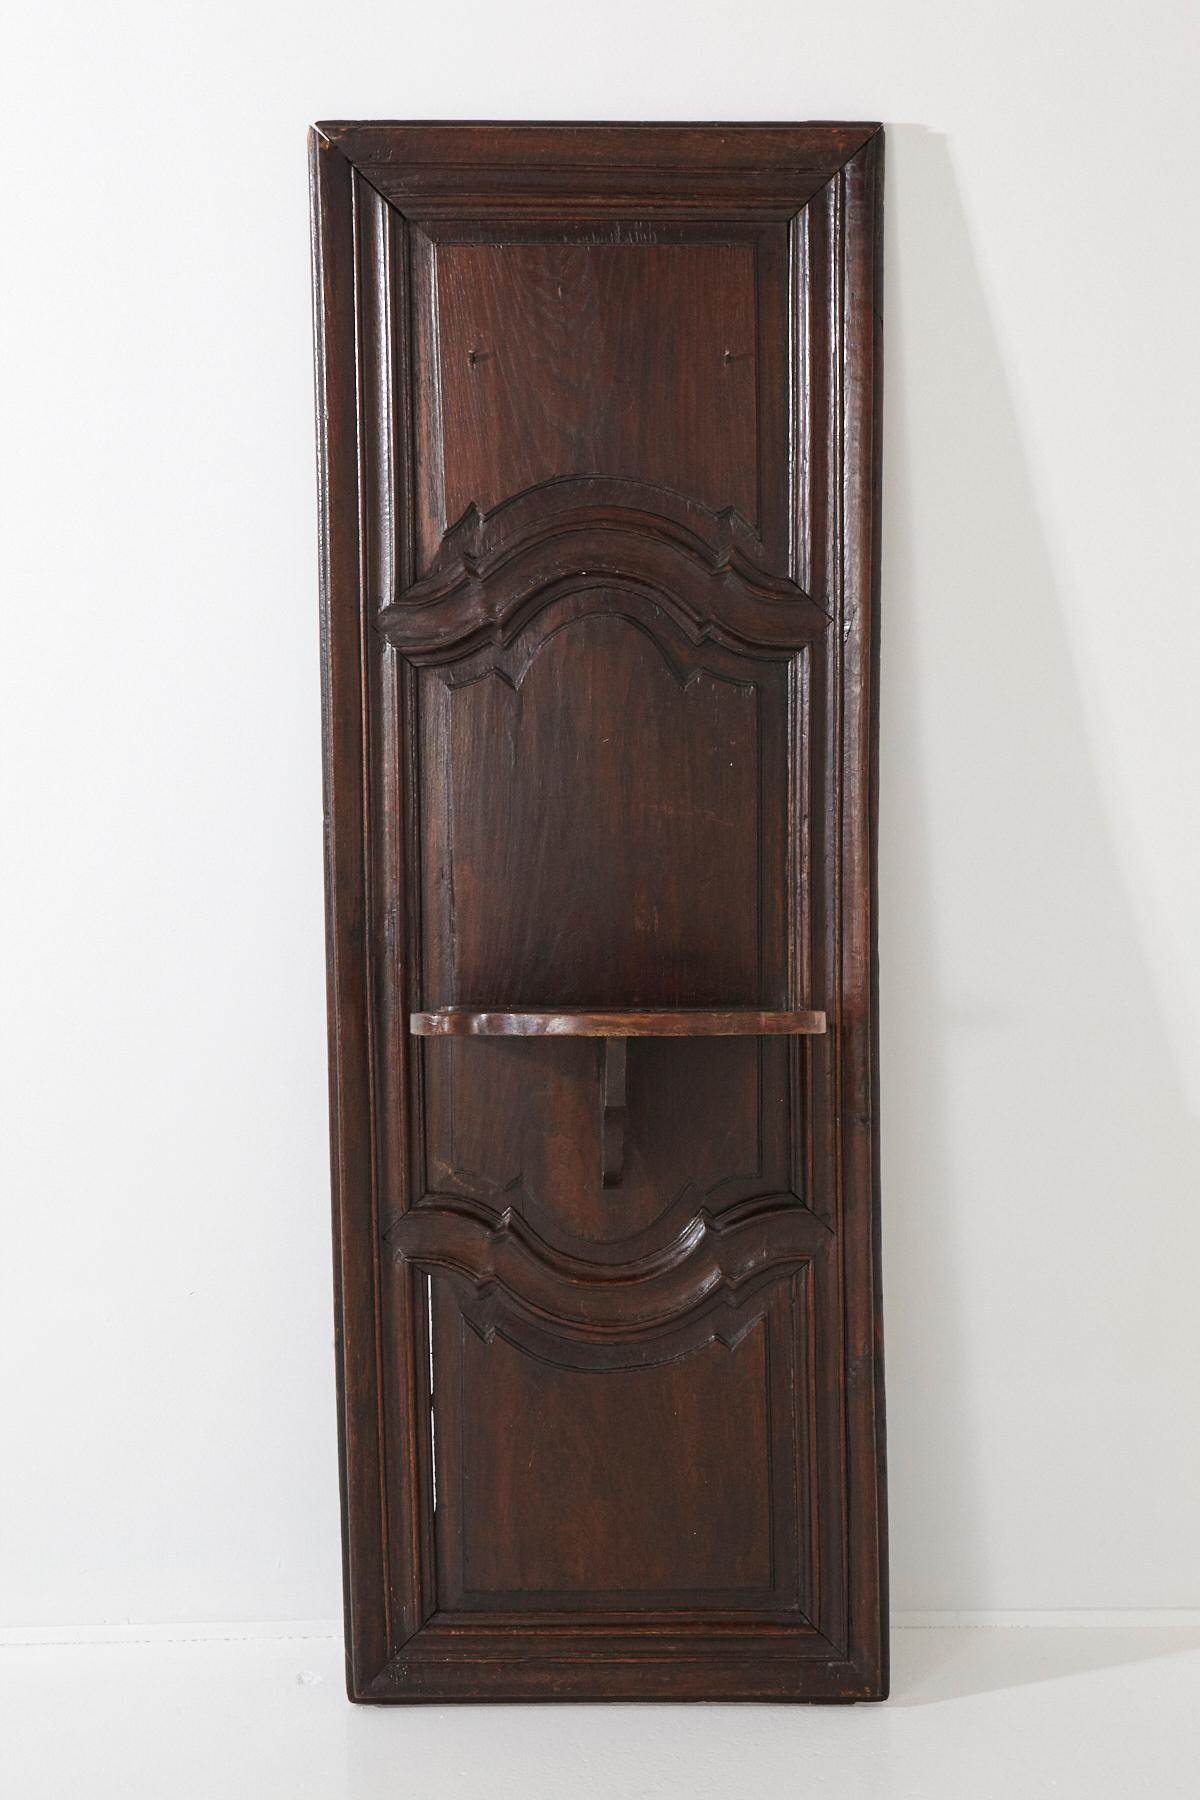 Carved wall panel with integrated shelf bracket, early 19th century.
There is a plentitude of possibilities, as a standalone object leaning against a wall or upright fixed on the wall, or some functional usage in an entrance hall, etc.
A lovely